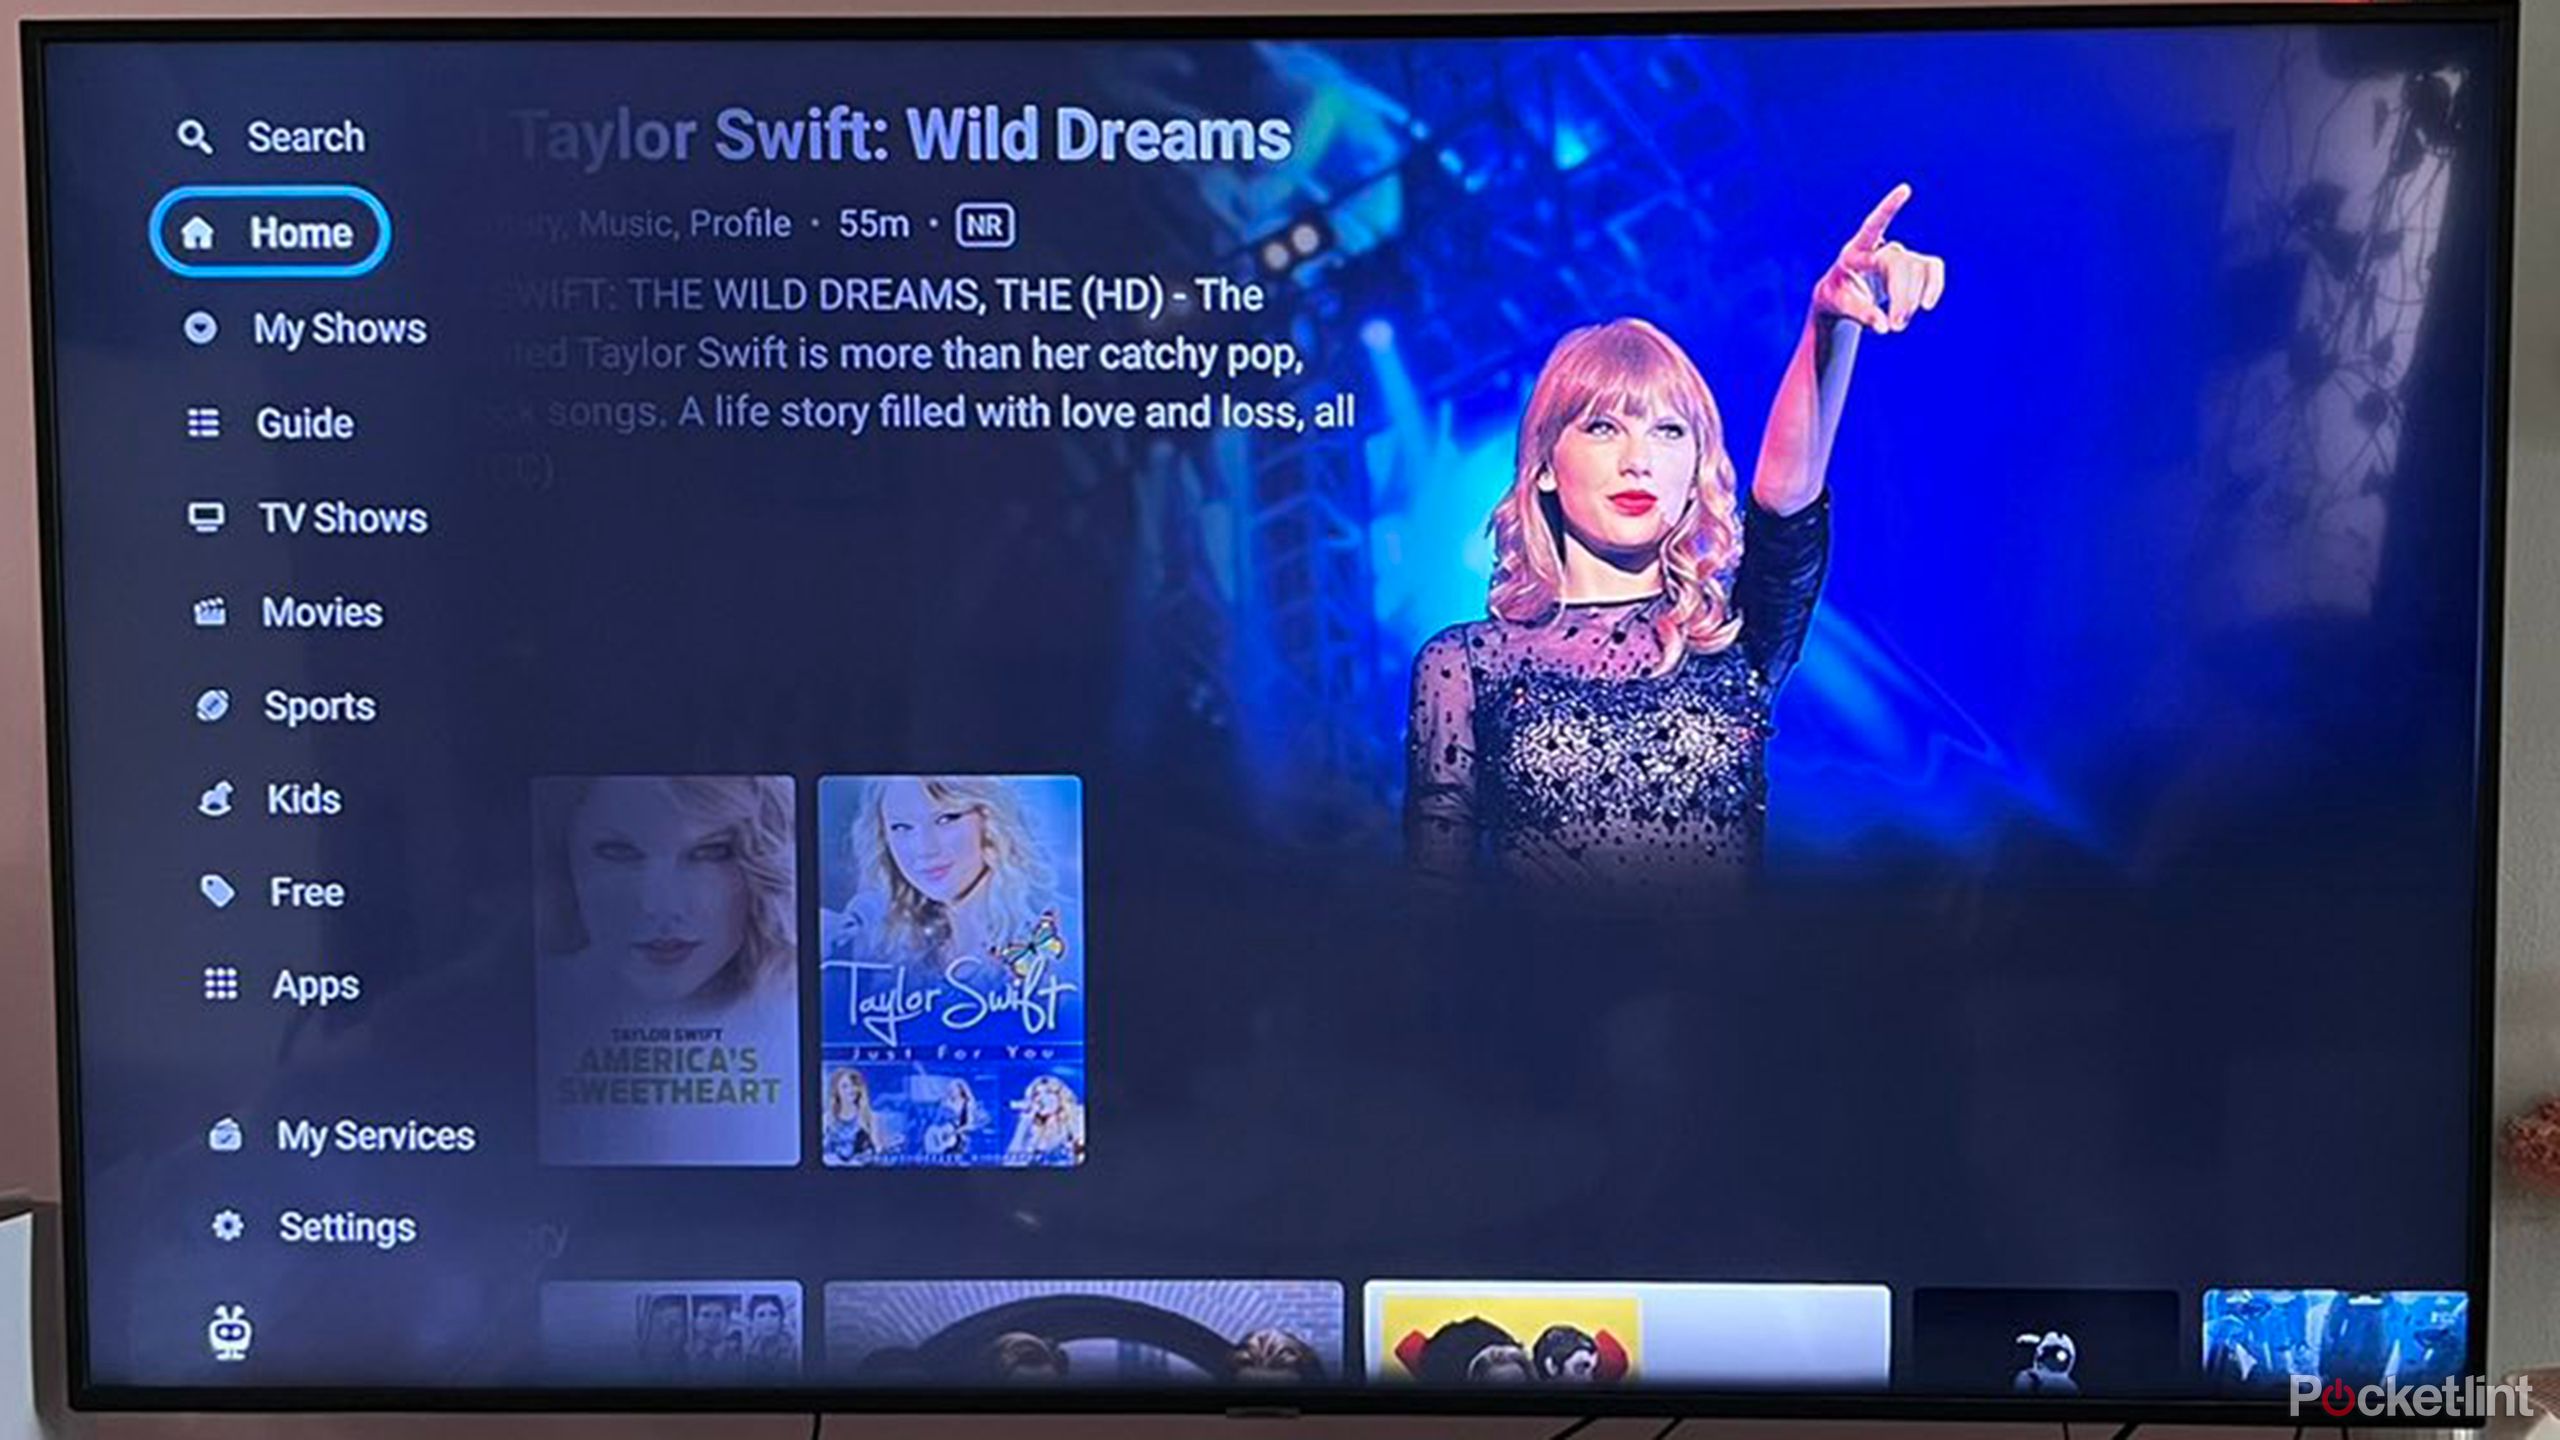 Tivo stream 4k interface with Taylor Swift